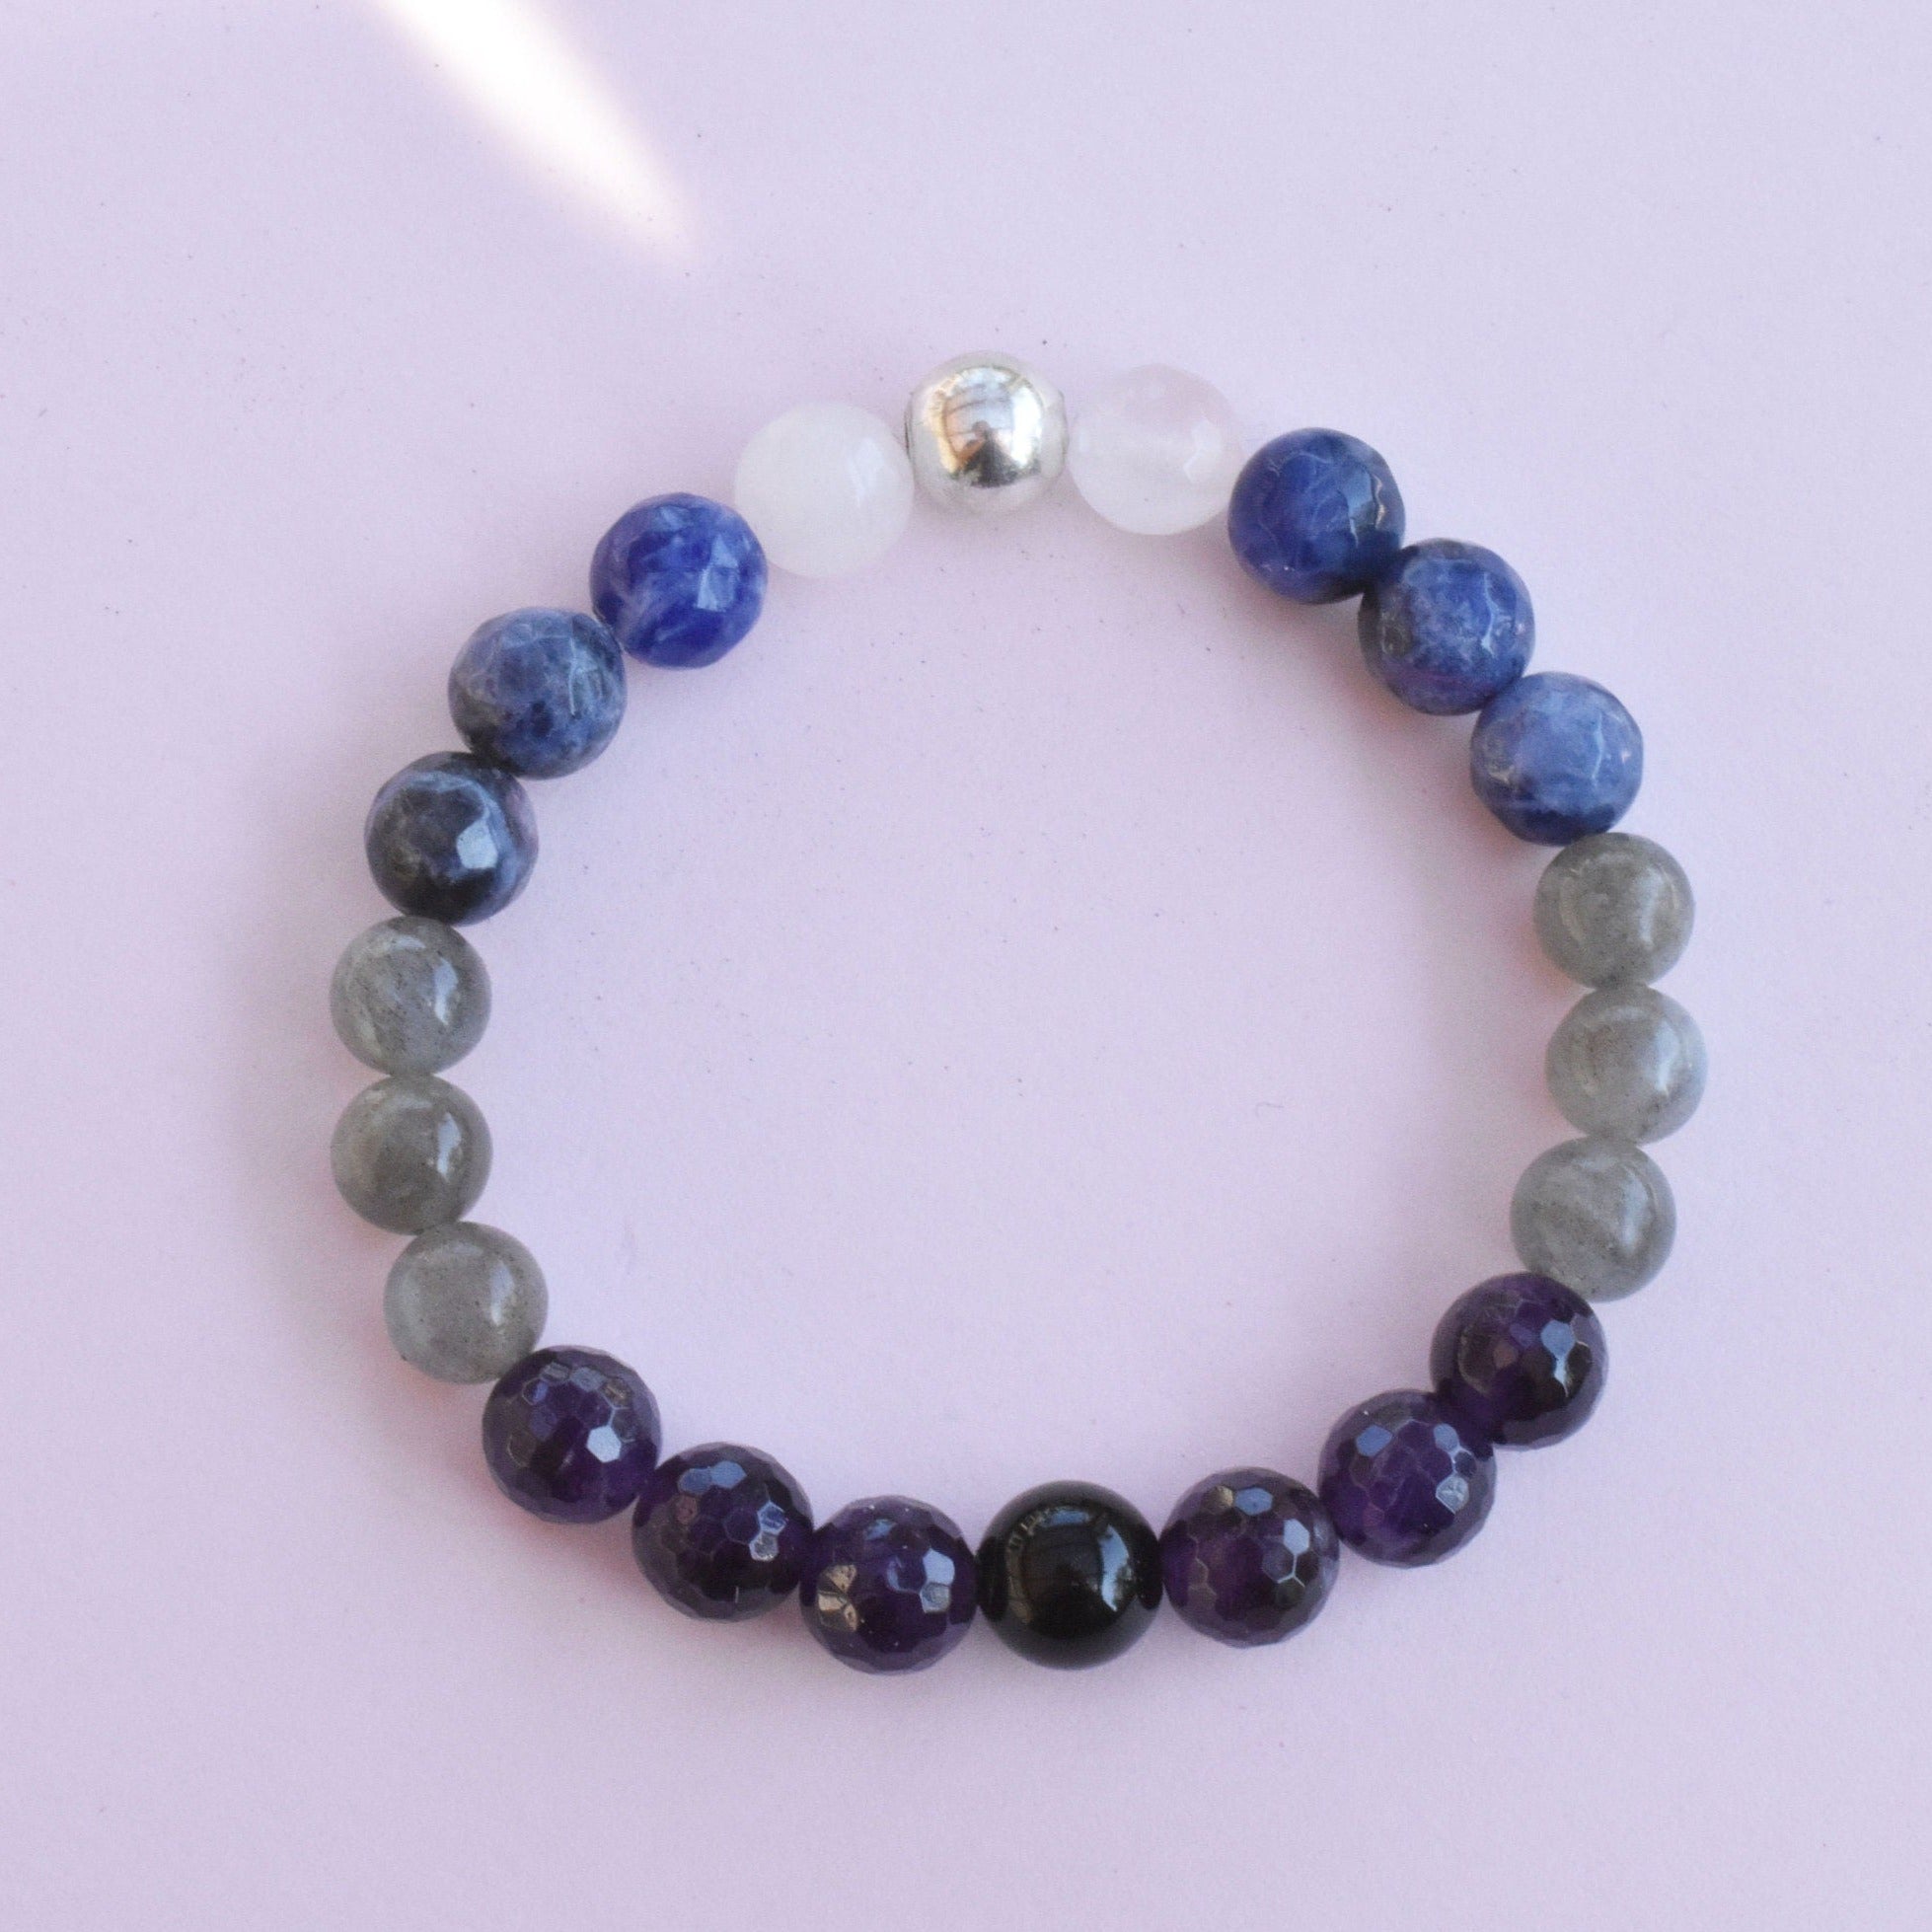 Awaken your psychic intuitive abilities with the power of healing crystal gemstones. This bracelet features sodalite, moonstone, labradorite, amethyst and black obsidian to help you on your development journey. 